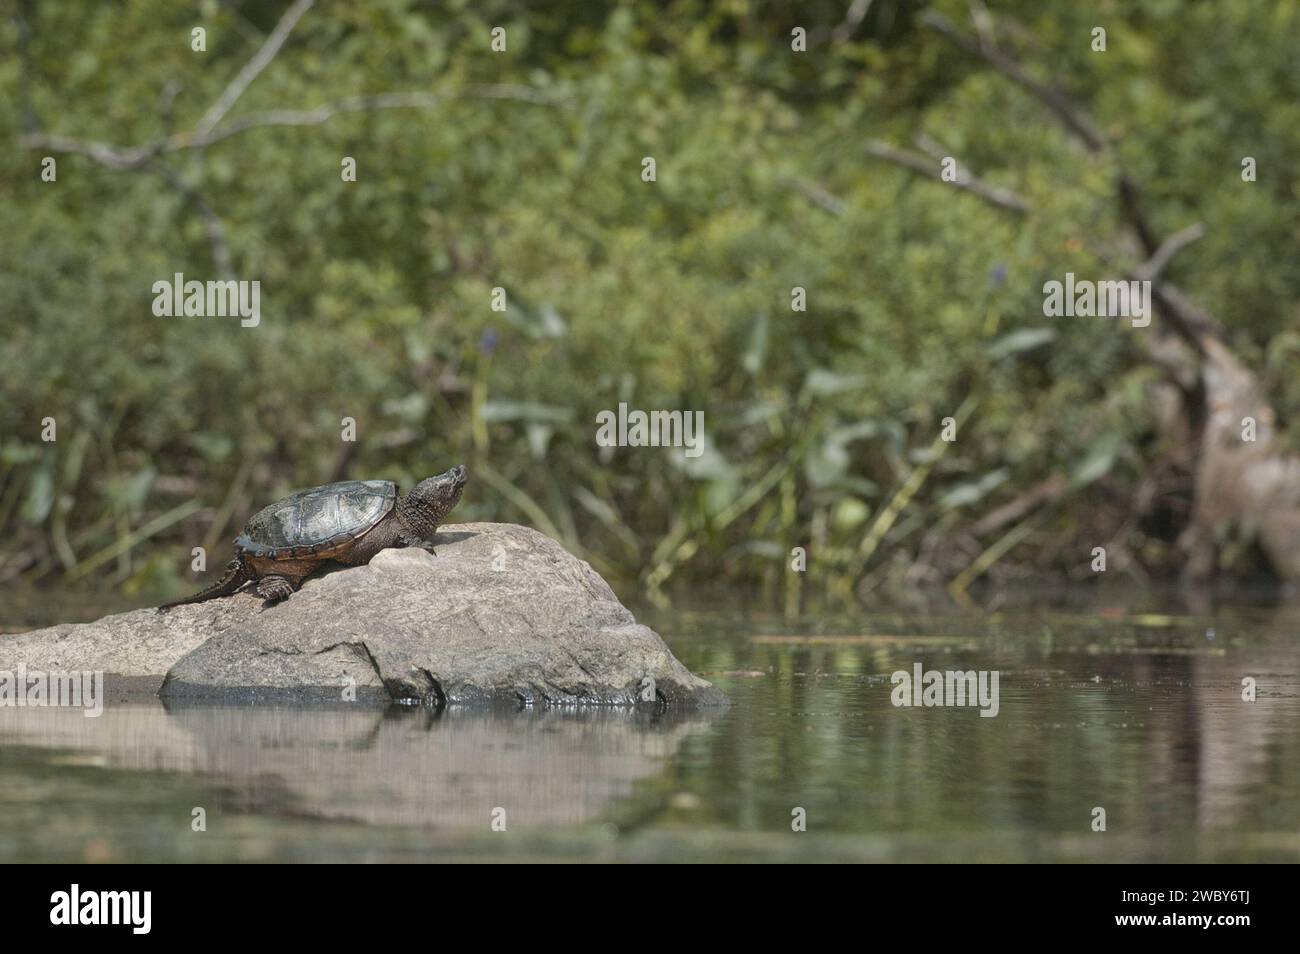 Snapping Turtle on a rock Stock Photo